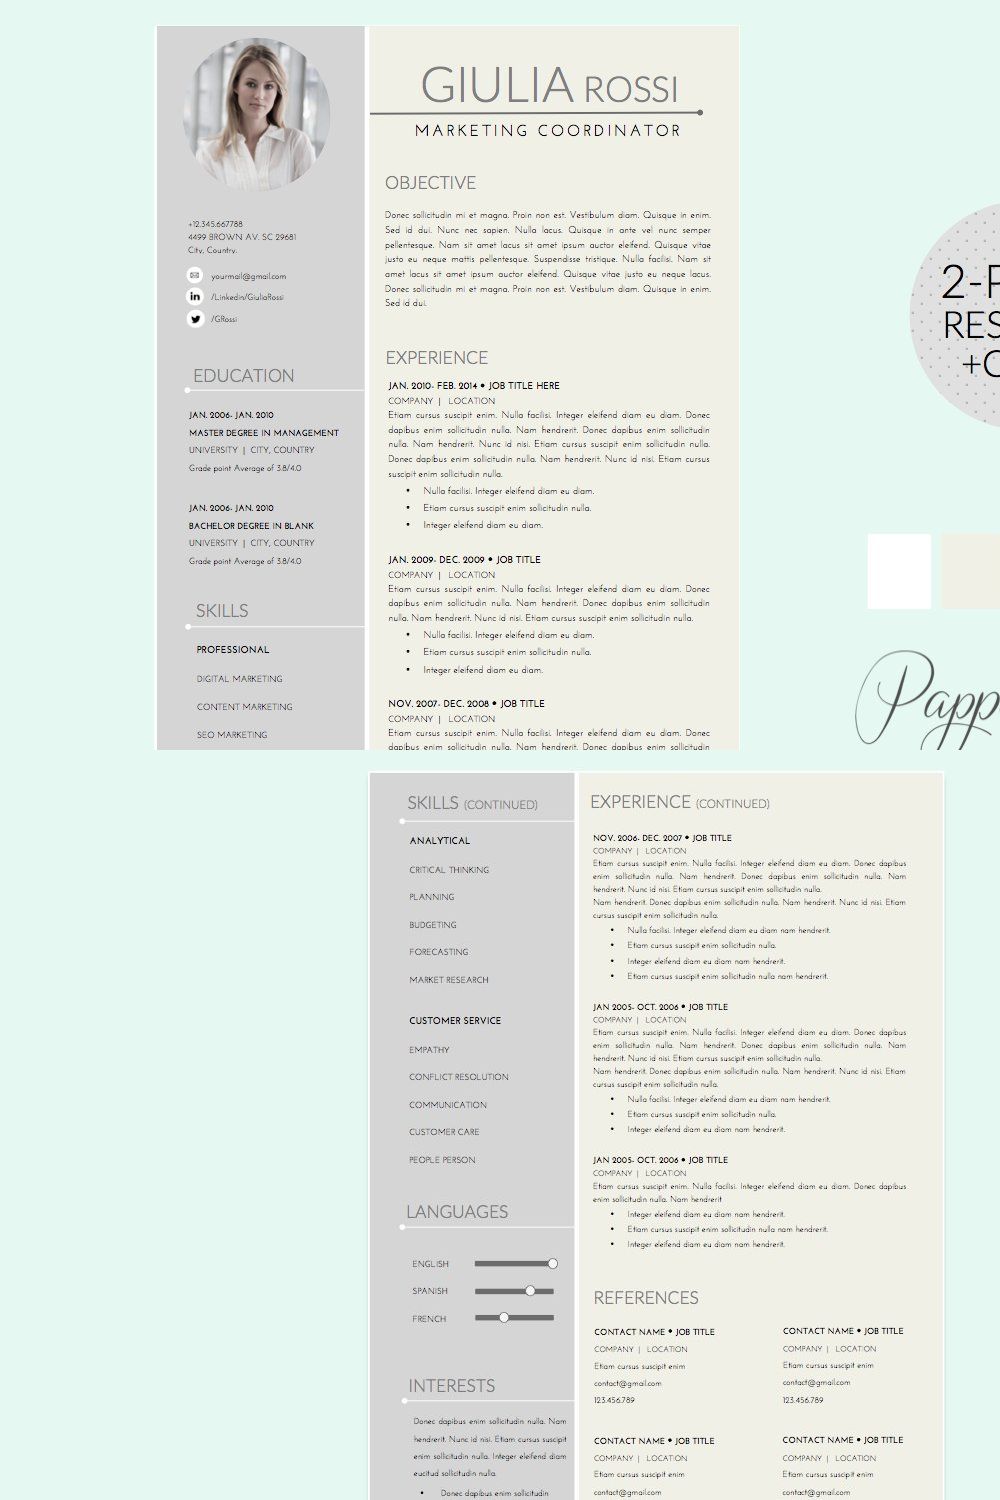 Giulia Rossi Resume Template + Cover pinterest preview image.